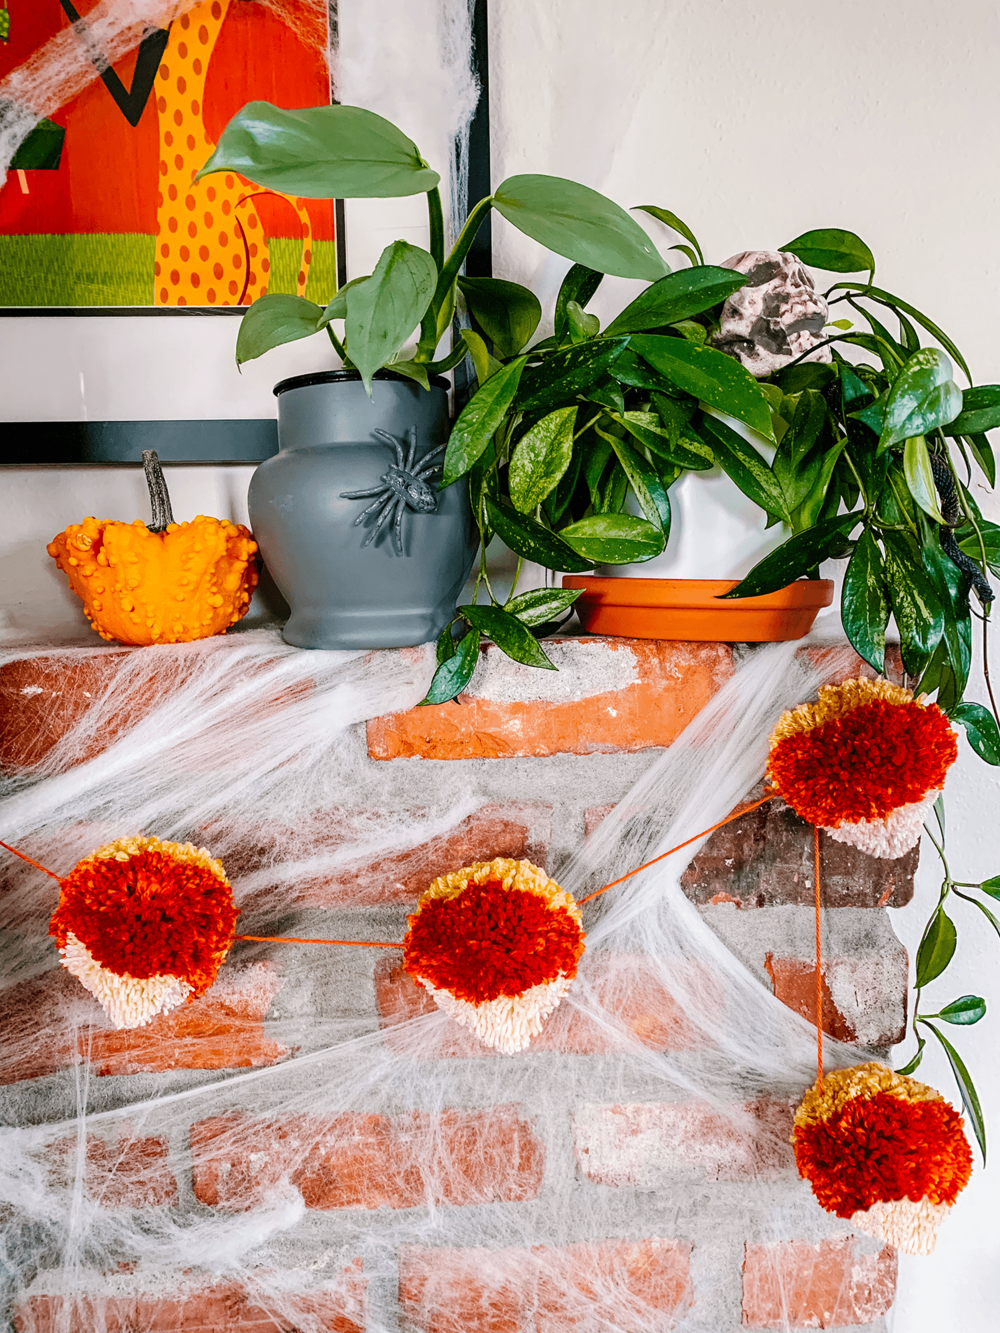 How to Make a Candy Corn Pom Garland